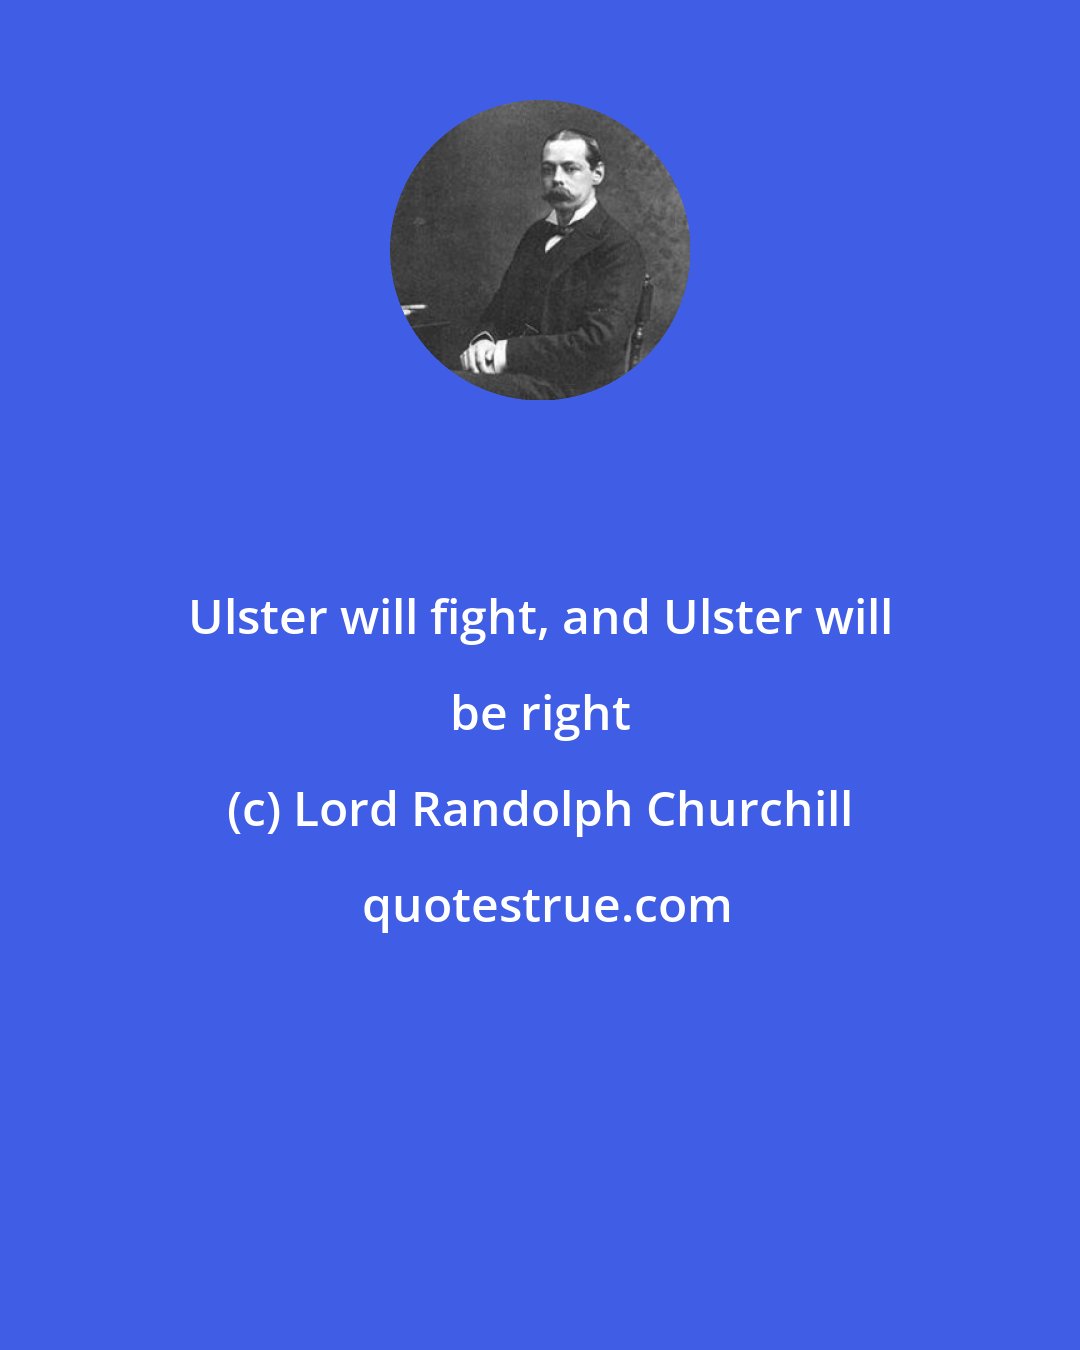 Lord Randolph Churchill: Ulster will fight, and Ulster will be right